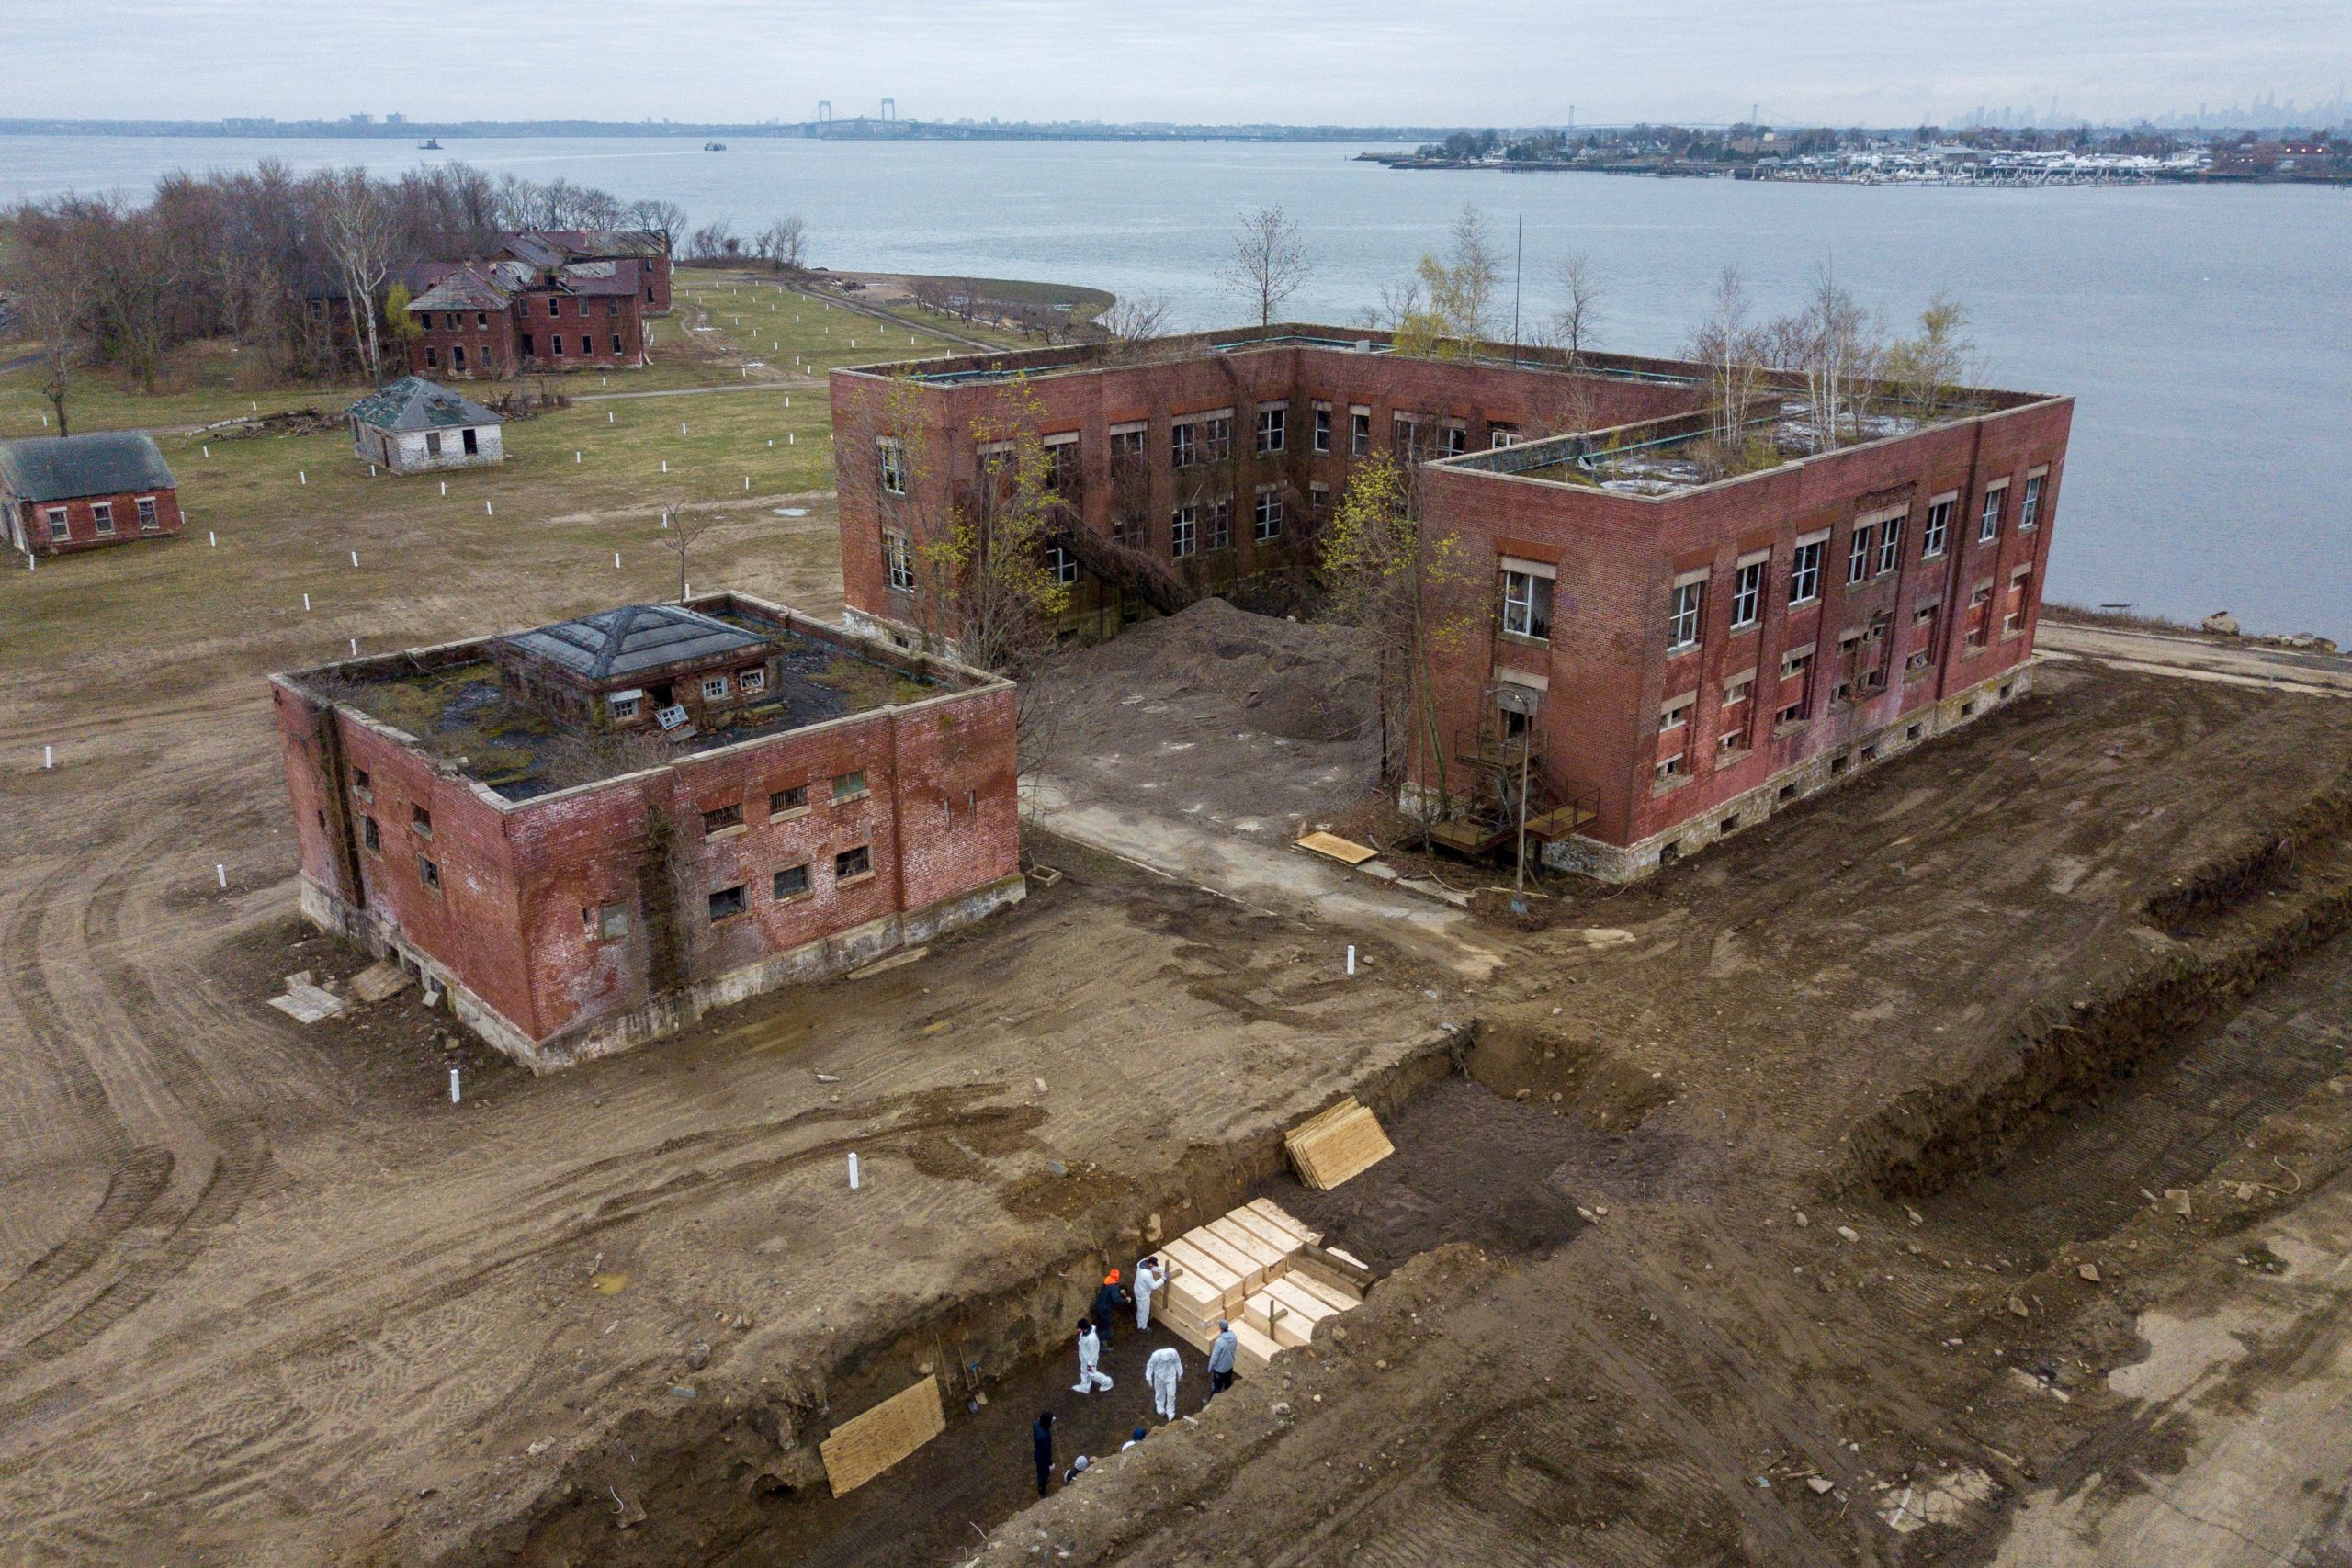 Chatting the Pictures: Significance of the Early Pandemic Drone Photo of NYC’s Hart Island